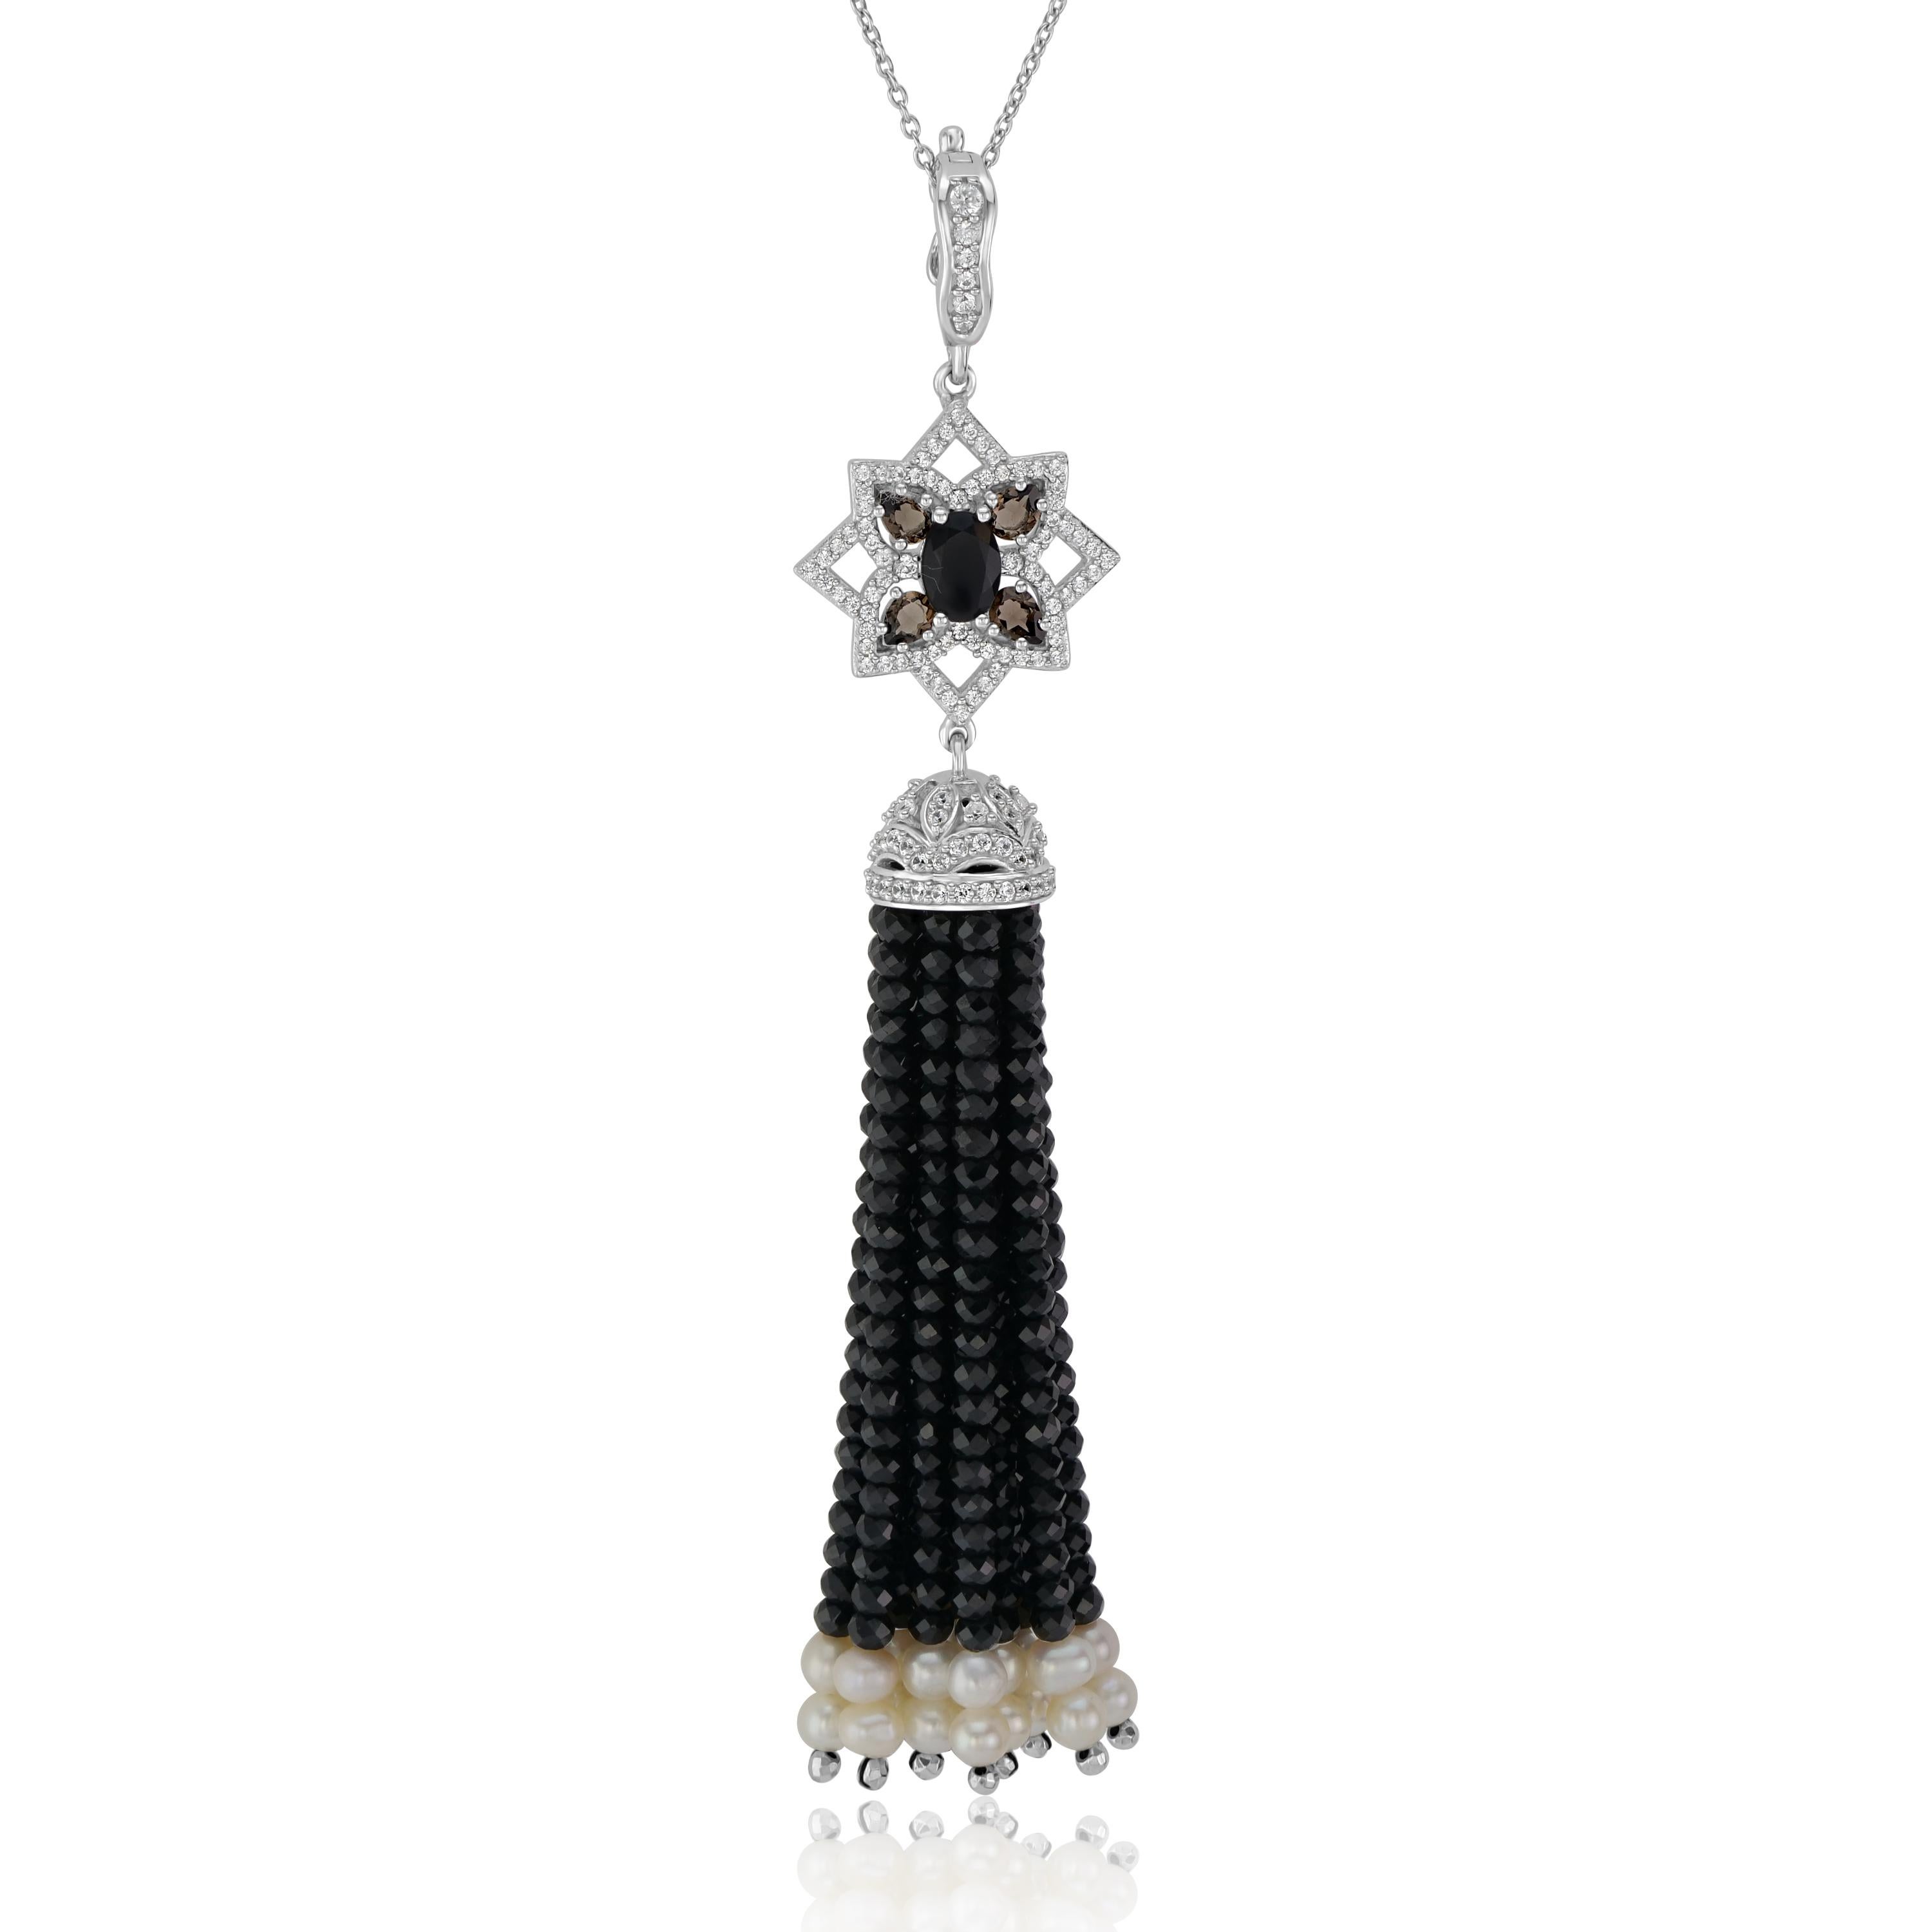 A necklace to go with your favorite earrings.This women's tassel necklace is featured with black spinal beads and freshwater pearls accompanied by white natural zircon and smoky quartz. Crafted in genuine and nickel free 925 sterling silver.